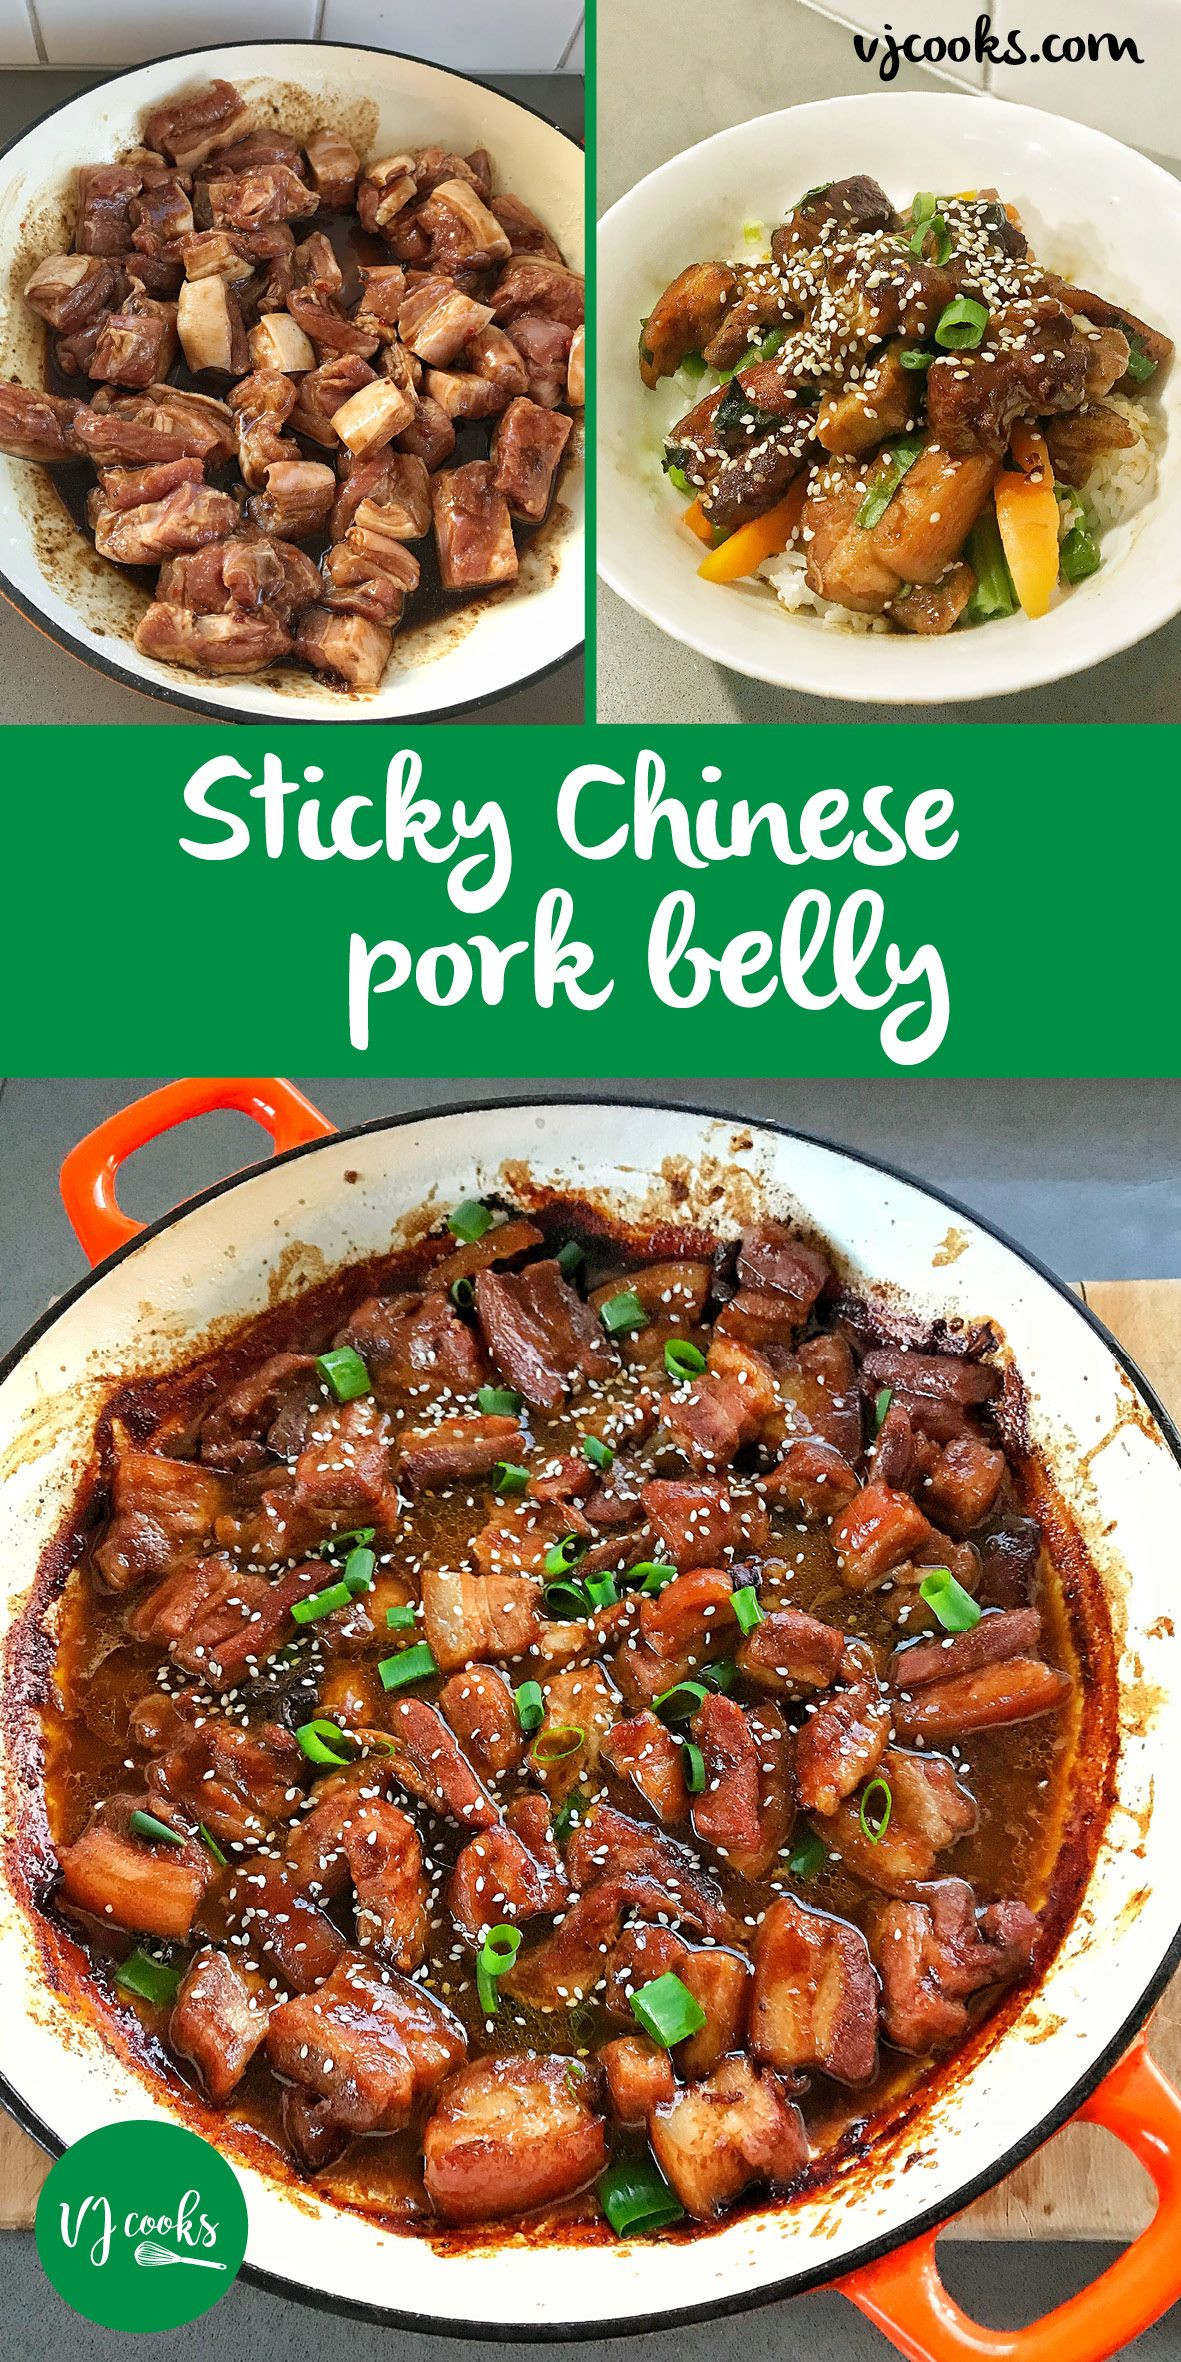 Chinese Pork Belly Recipes
 Chinese 5 spice pork belly Recipe